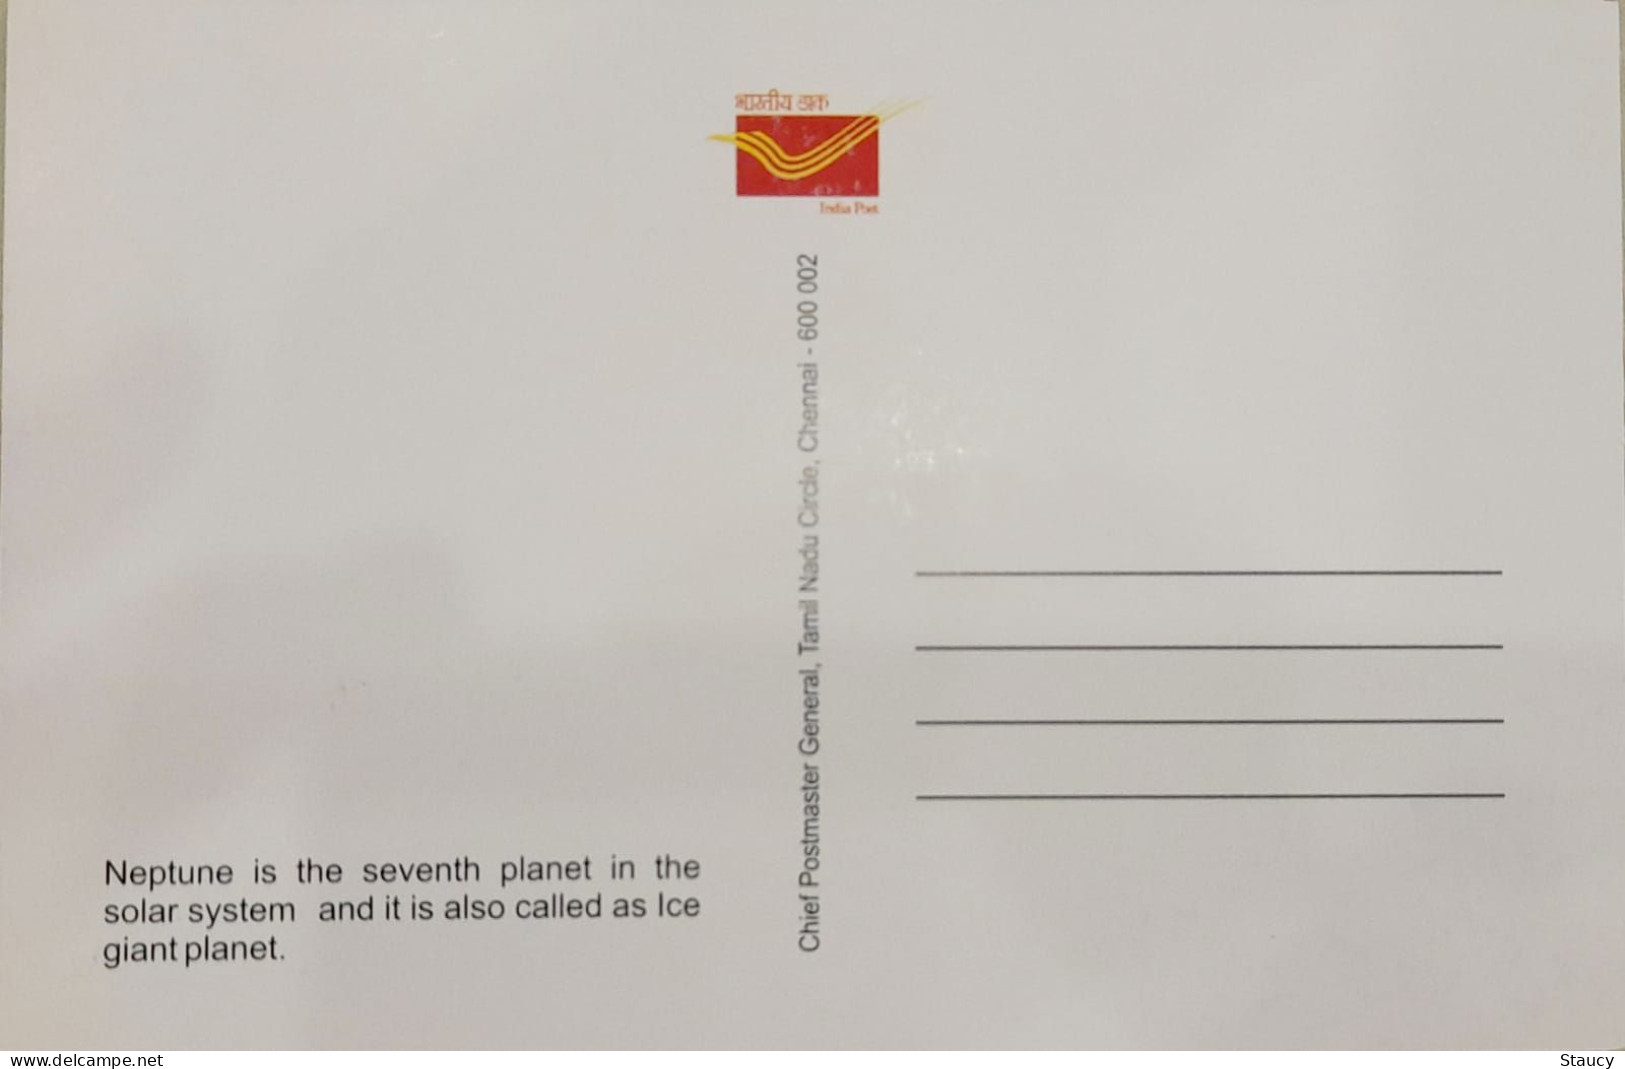 India 2018 - 19 The Solar System "INDIA POST" set of Picture Postcard PPC STAMPED & CANCELLED Special Pack as per scan